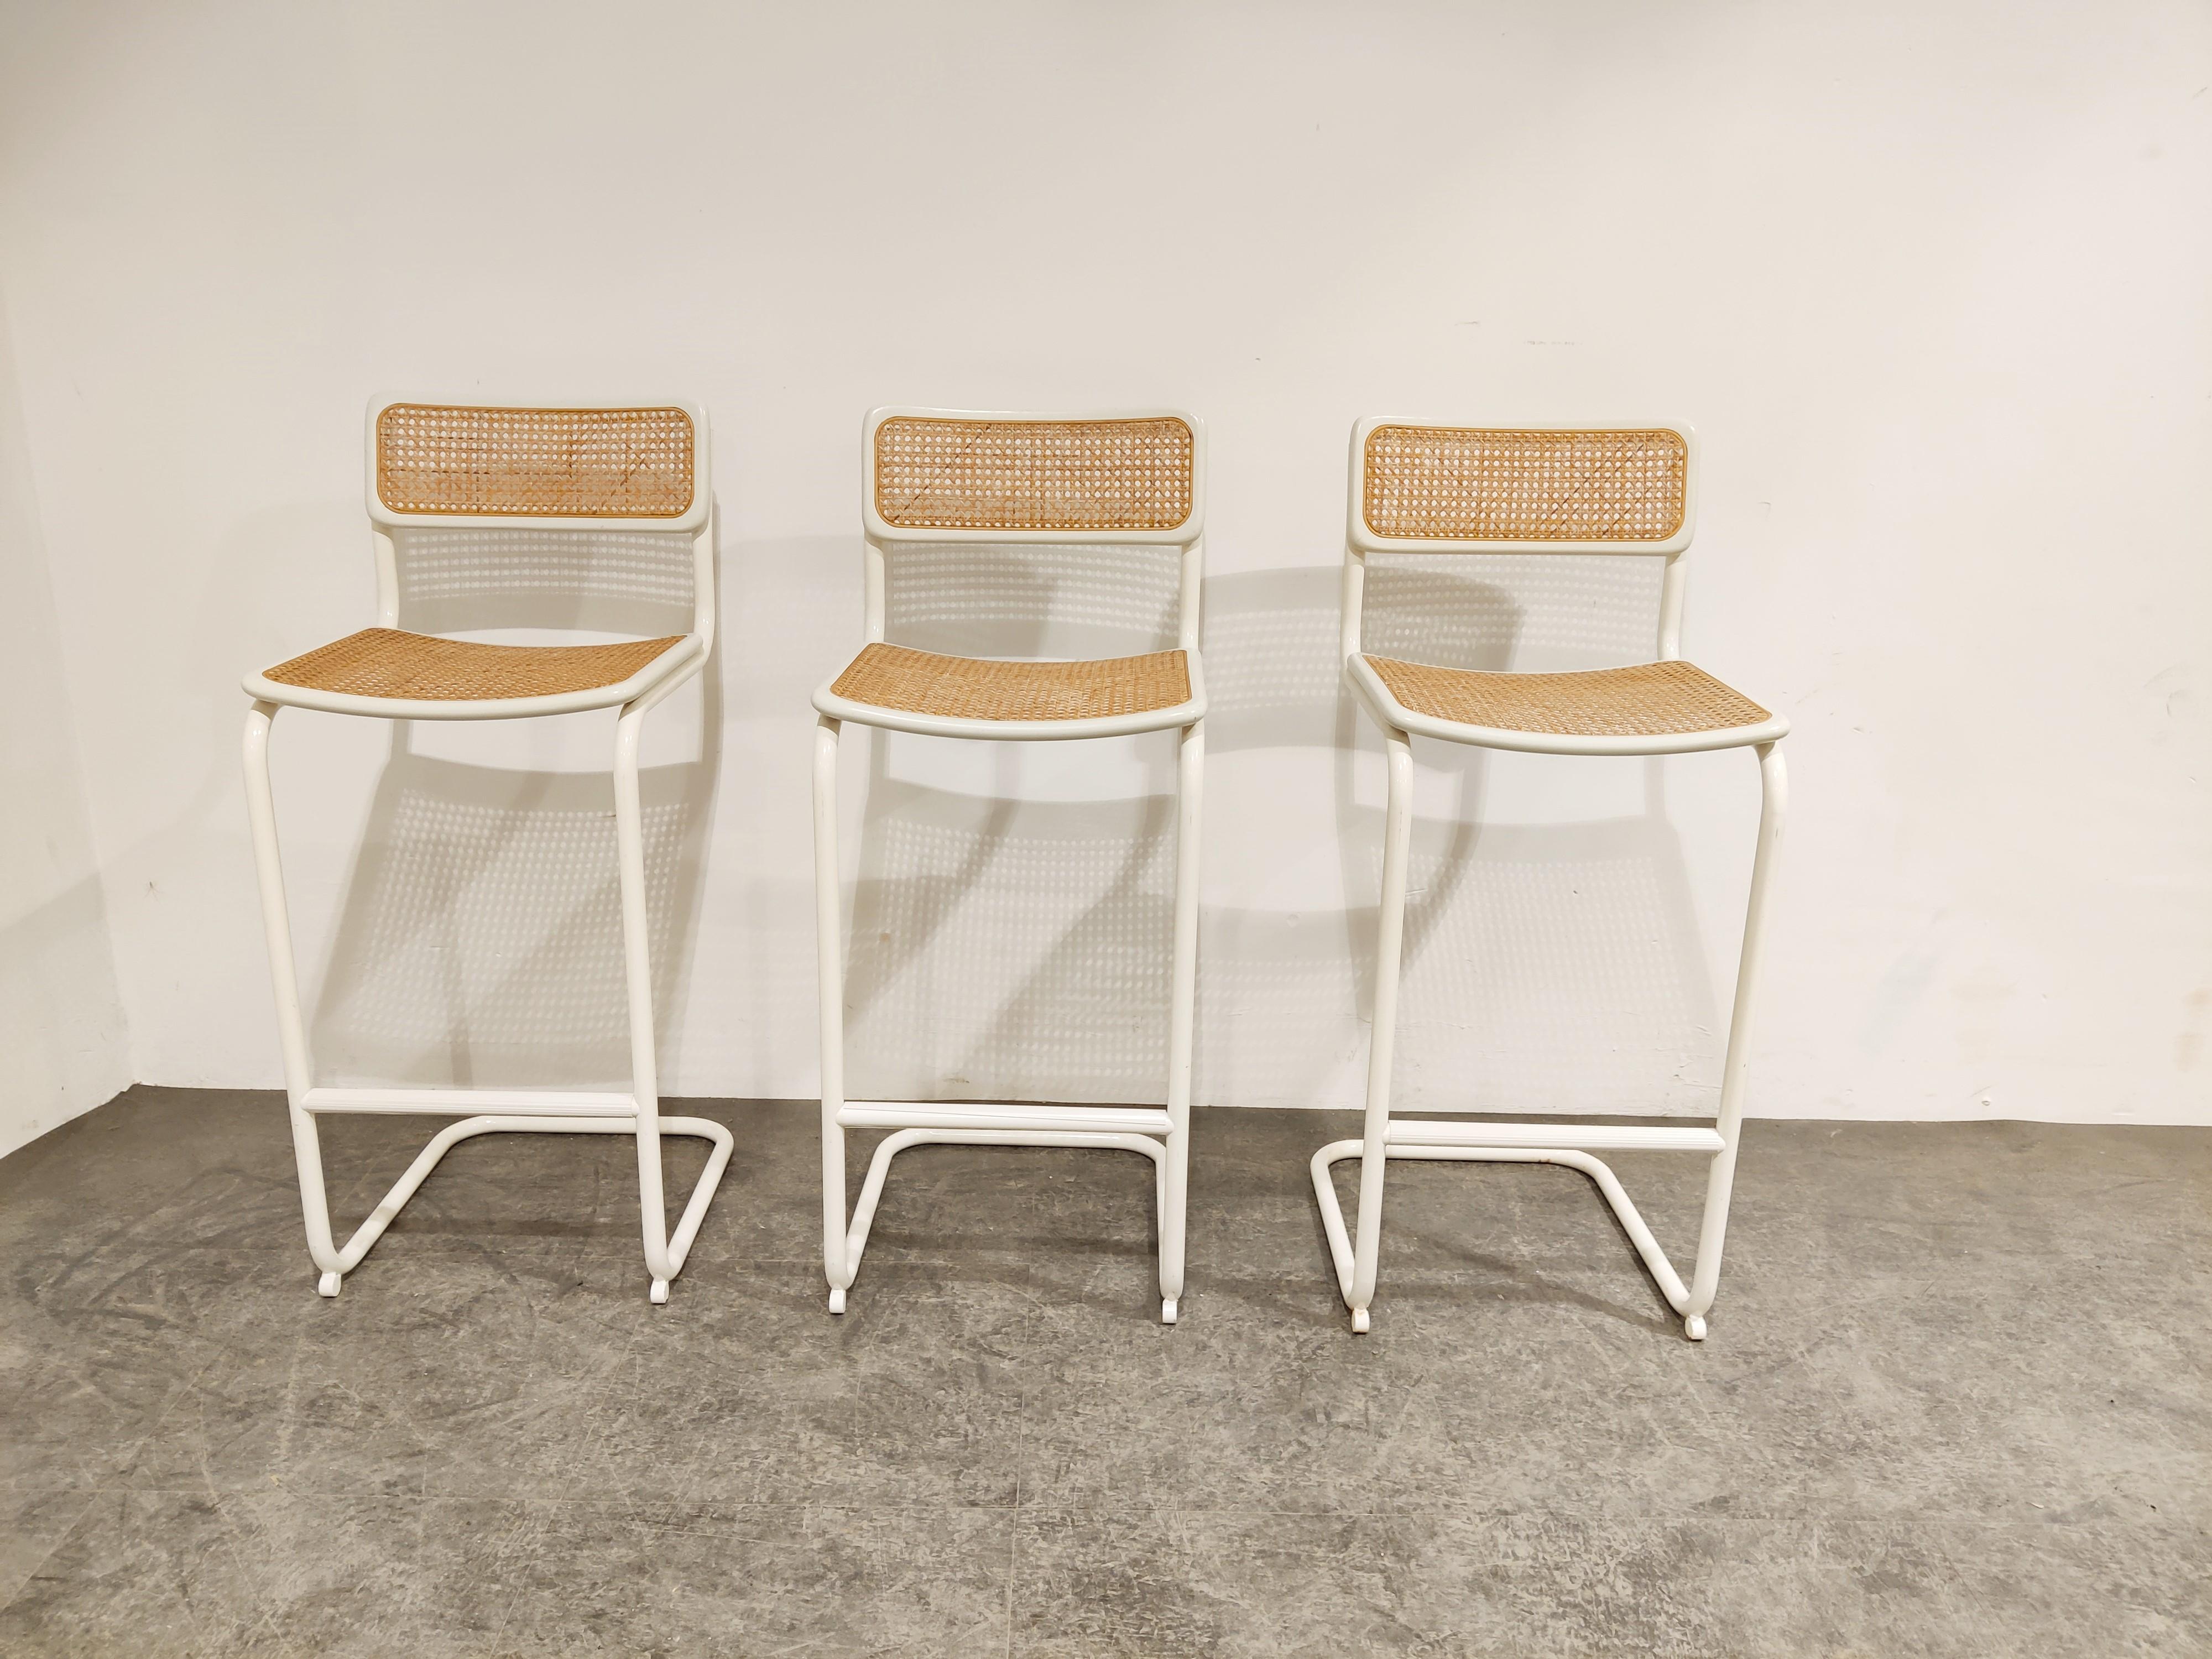 Set of 3 Marcel Breuer bauhaus design bar stools.

Tubular lacquered metal frames with cane seats.

All in good originaml condition.

Dimensions:
Height: 93cm/36.61